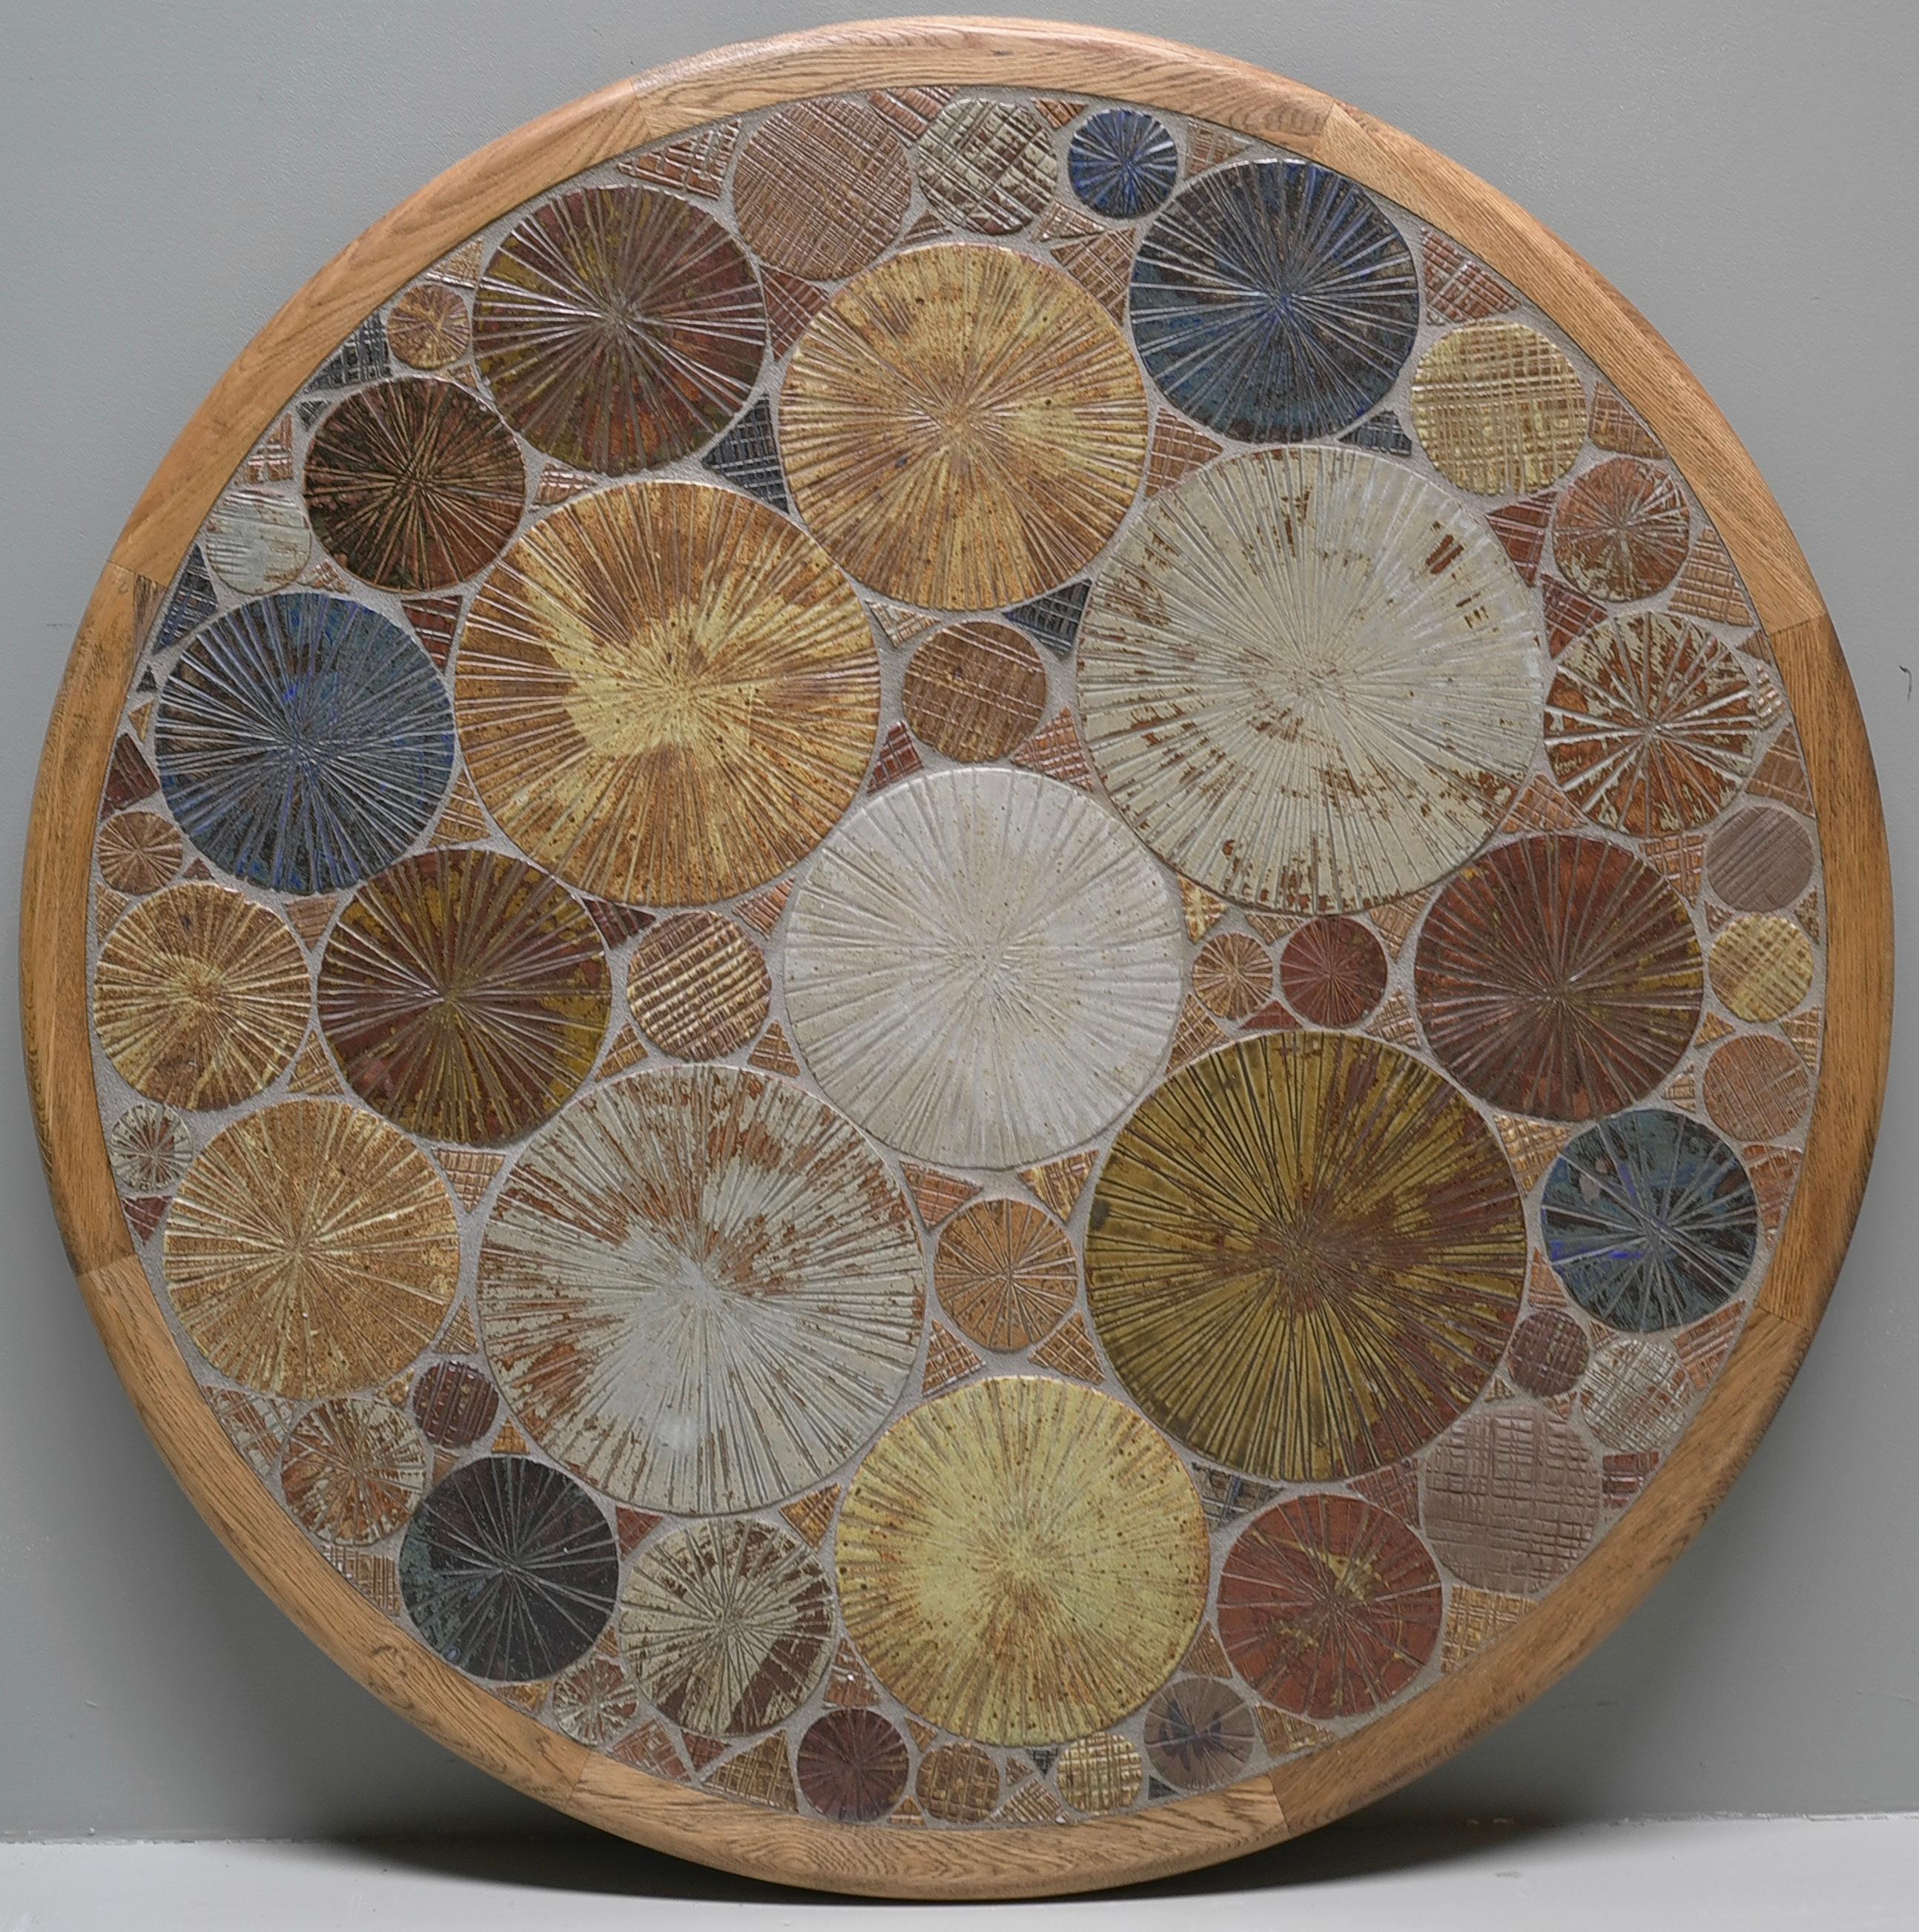 Large Tue Poulsen round Ceramic and Oak coffee table
Haslev Møbelsnedkeri A/S, Denmark, 1963
Multi-color textured tiles were handmade by the Danish artist.
Signed by the artist Tue.